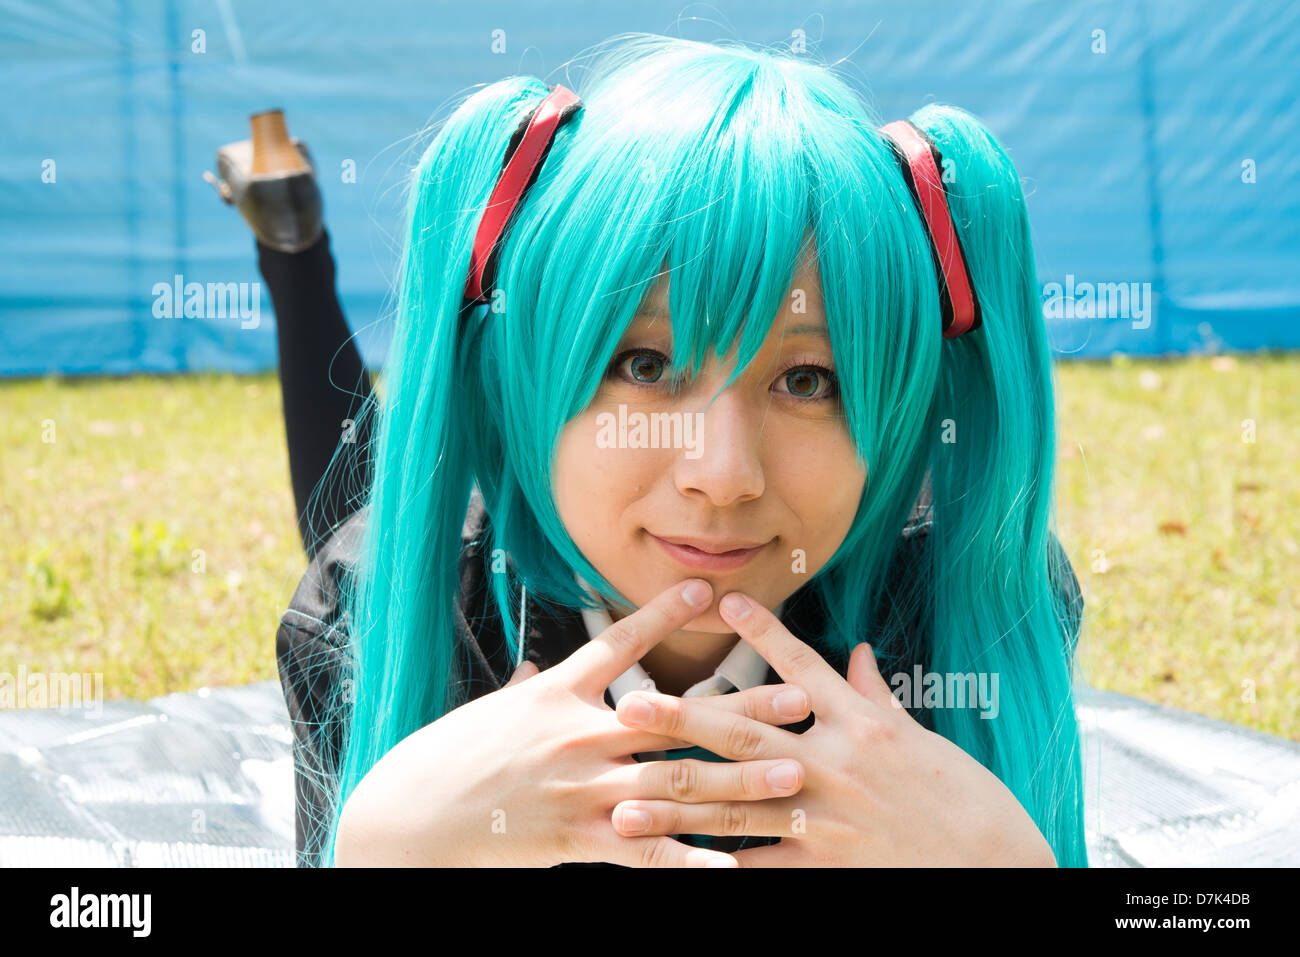 Young japanese girl dressed in cosplay costume Stock Photo